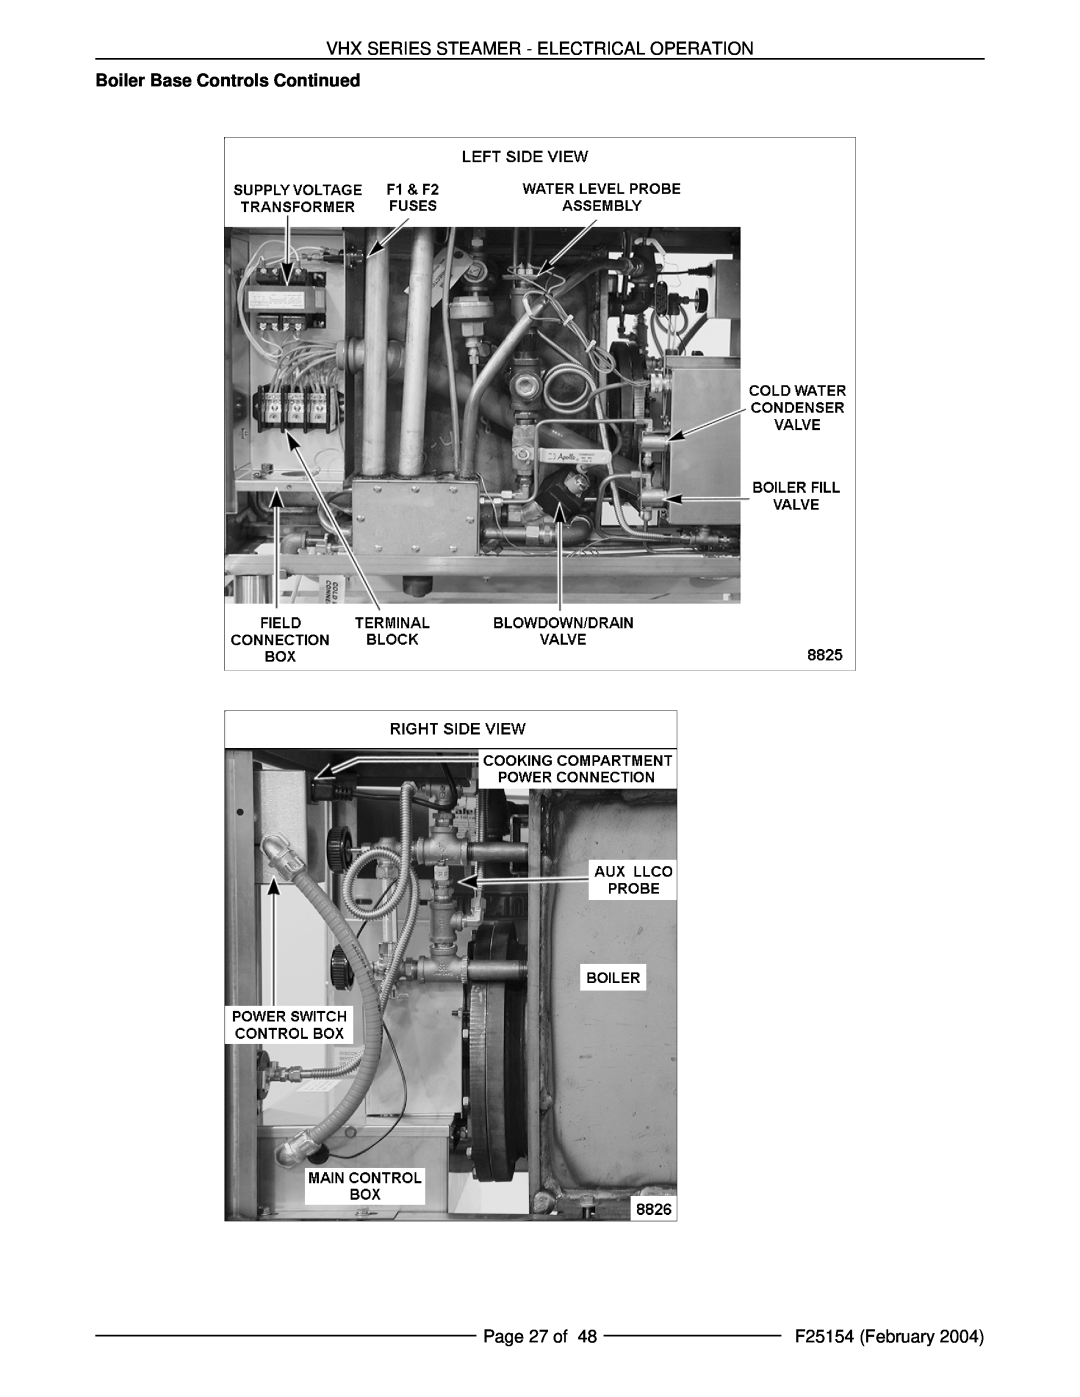 Vulcan-Hart VHX24E5 Boiler Base Controls Continued, Vhx Series Steamer - Electrical Operation, Page 27 of, F25154 February 